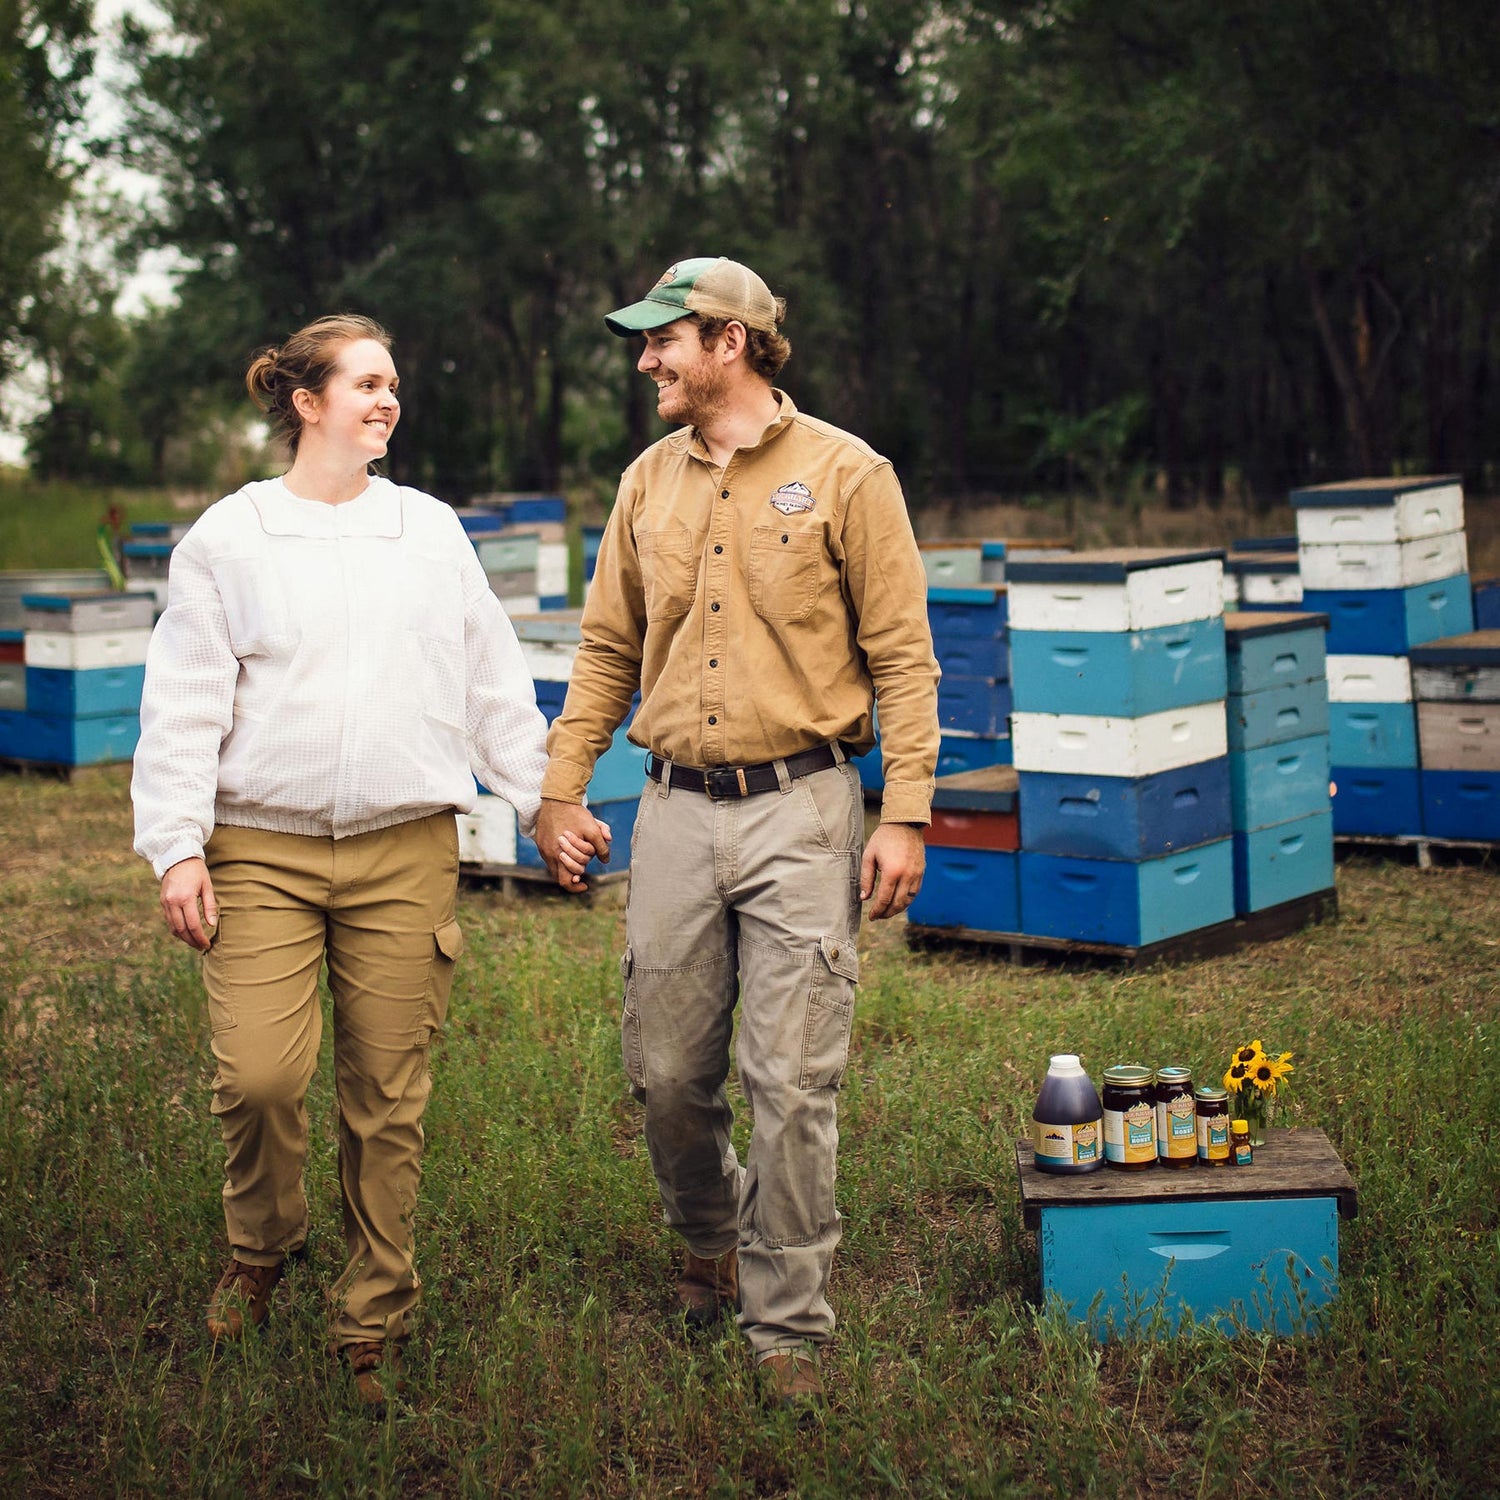 Leo and Laura Lockhart holding hands with bee hives in background